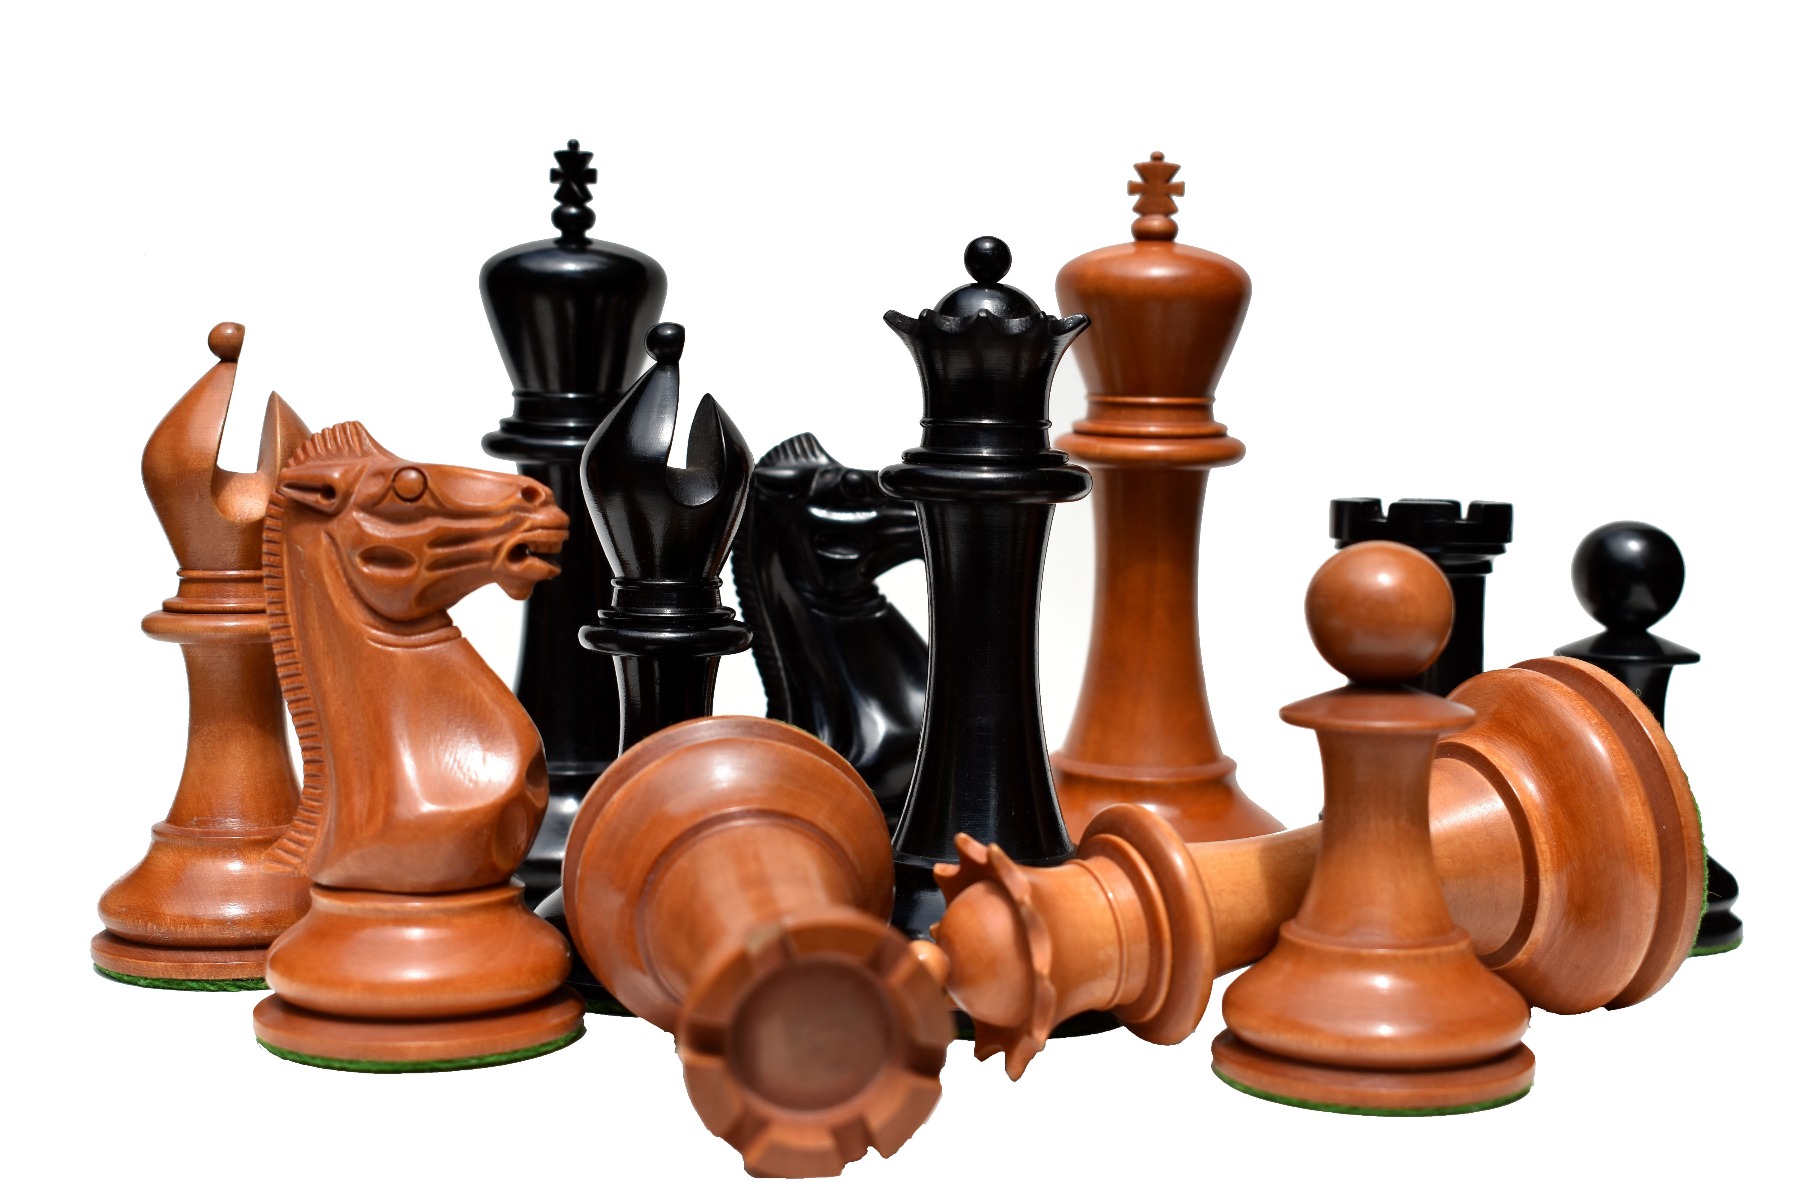 Chess Pieces - The House of Staunton